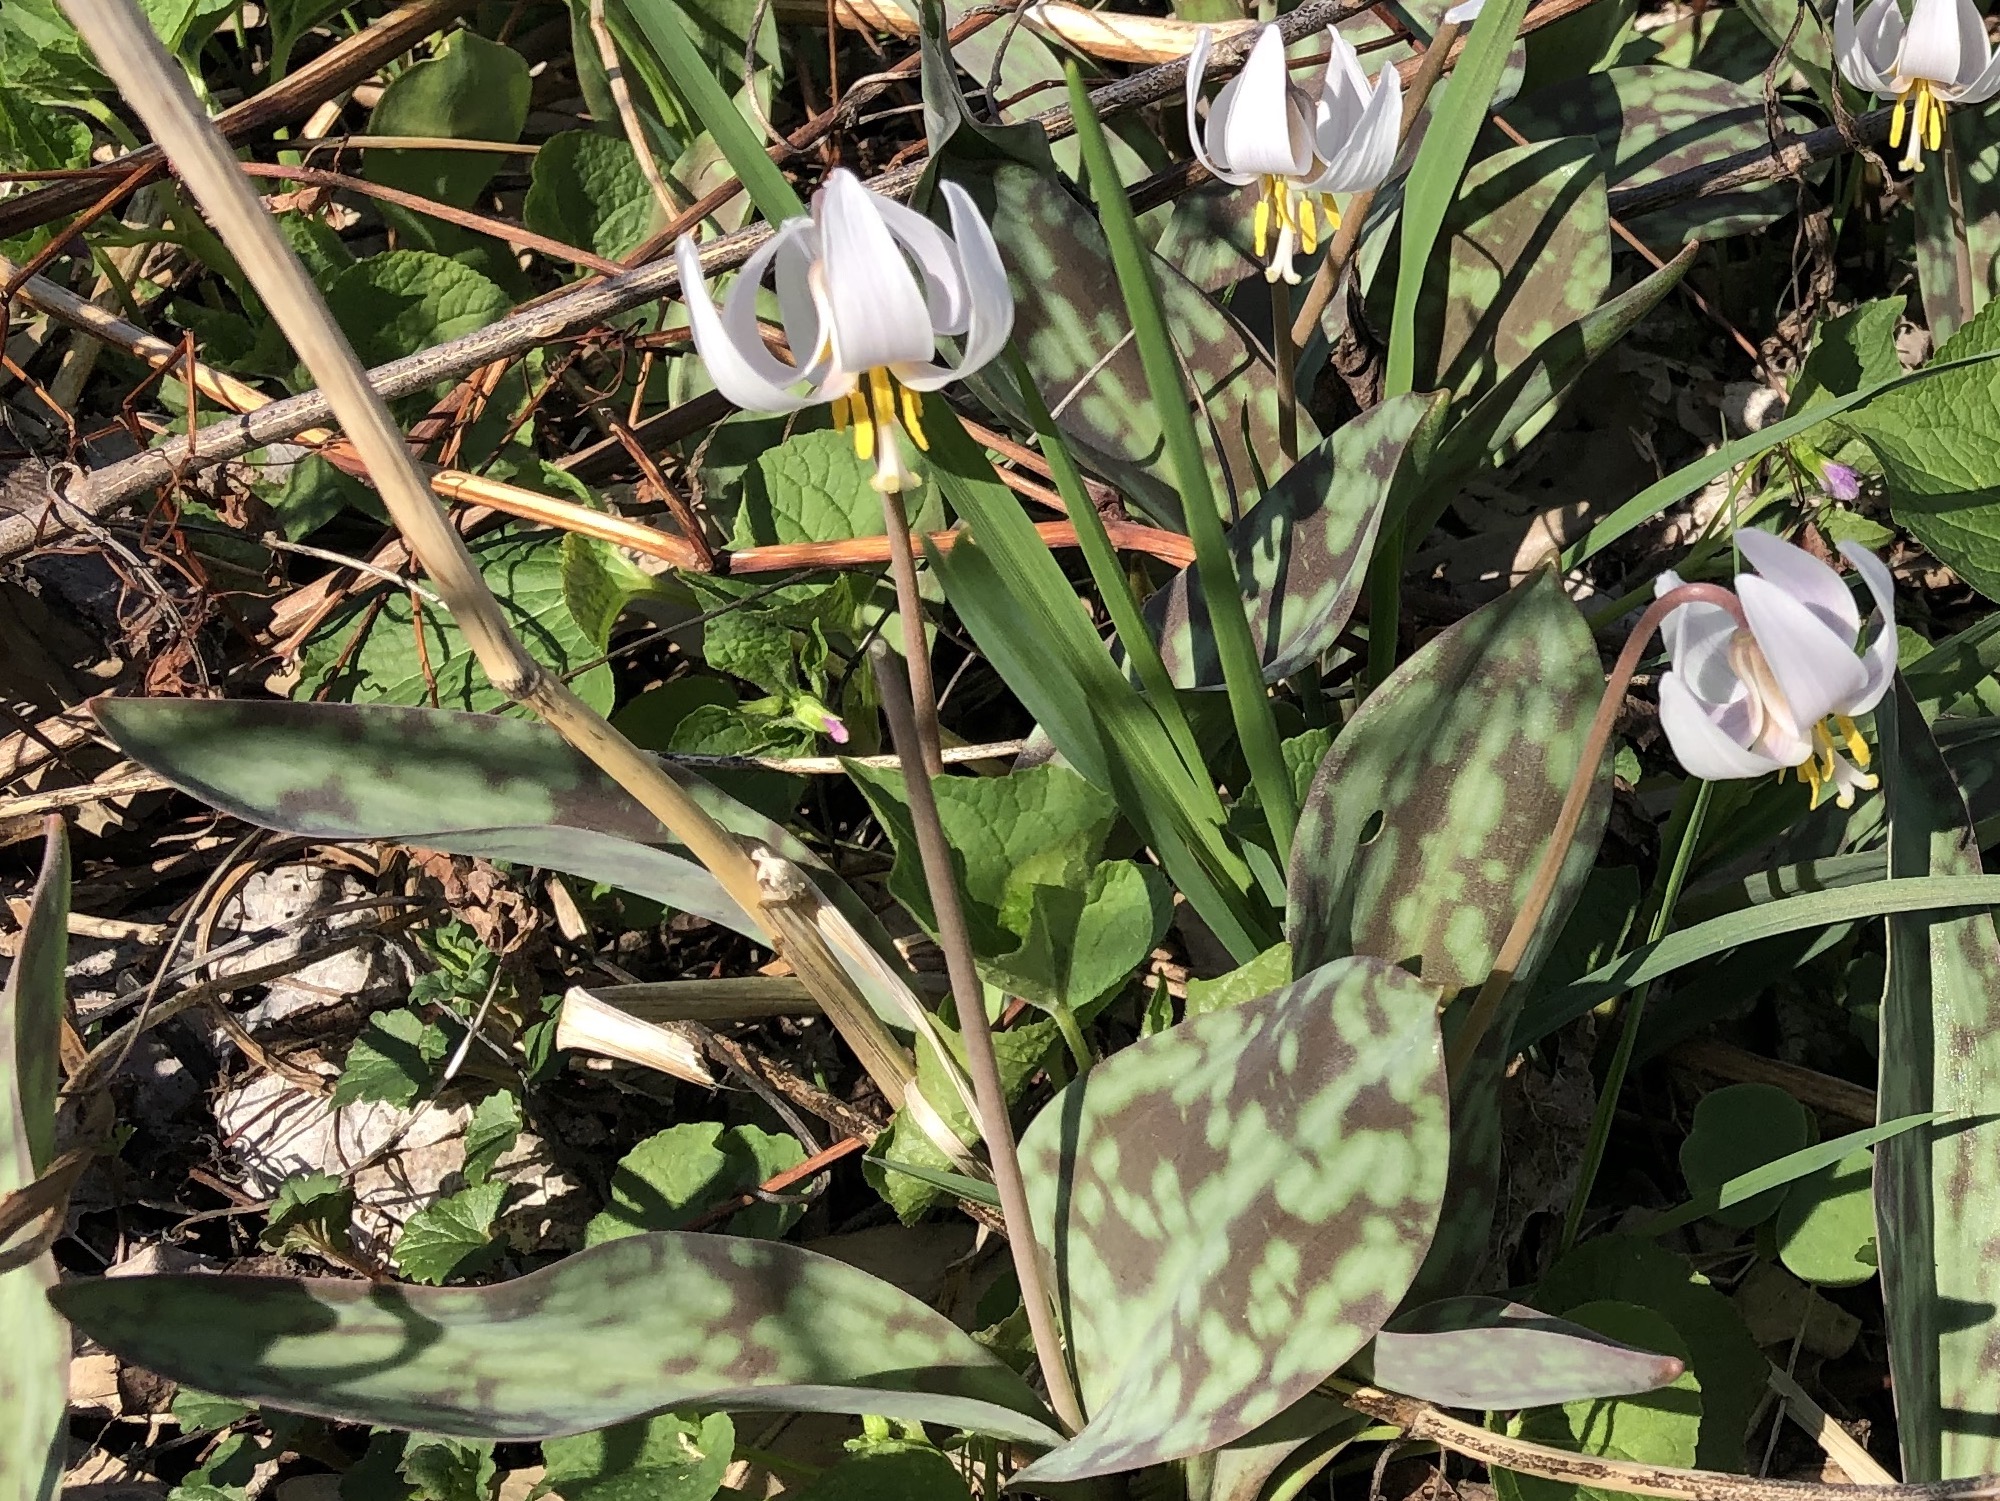 White Trout Lilies photo taken on April 21, 2019 in Madison, Wisconsin.